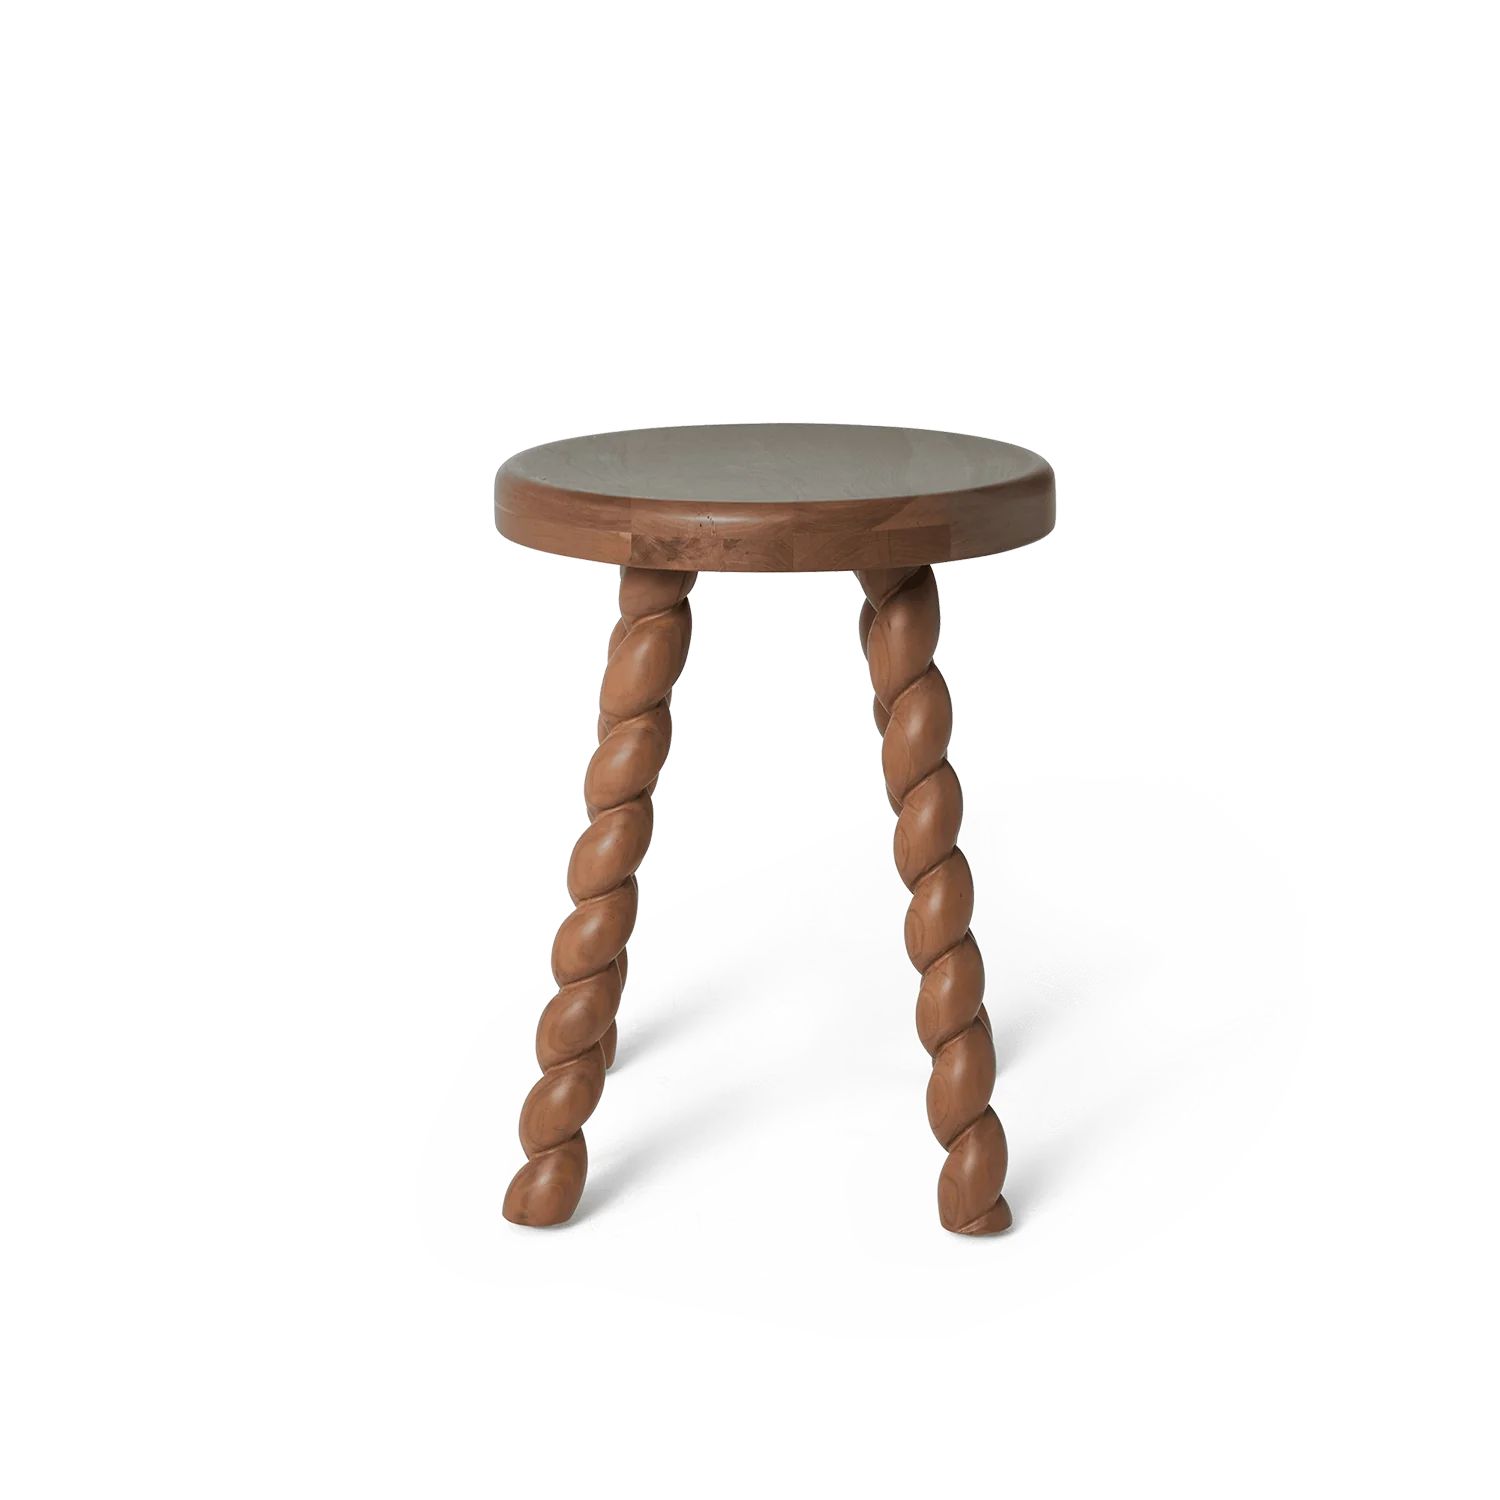 Twist side table - white oak with hand shaped spiral legs | Hati Home